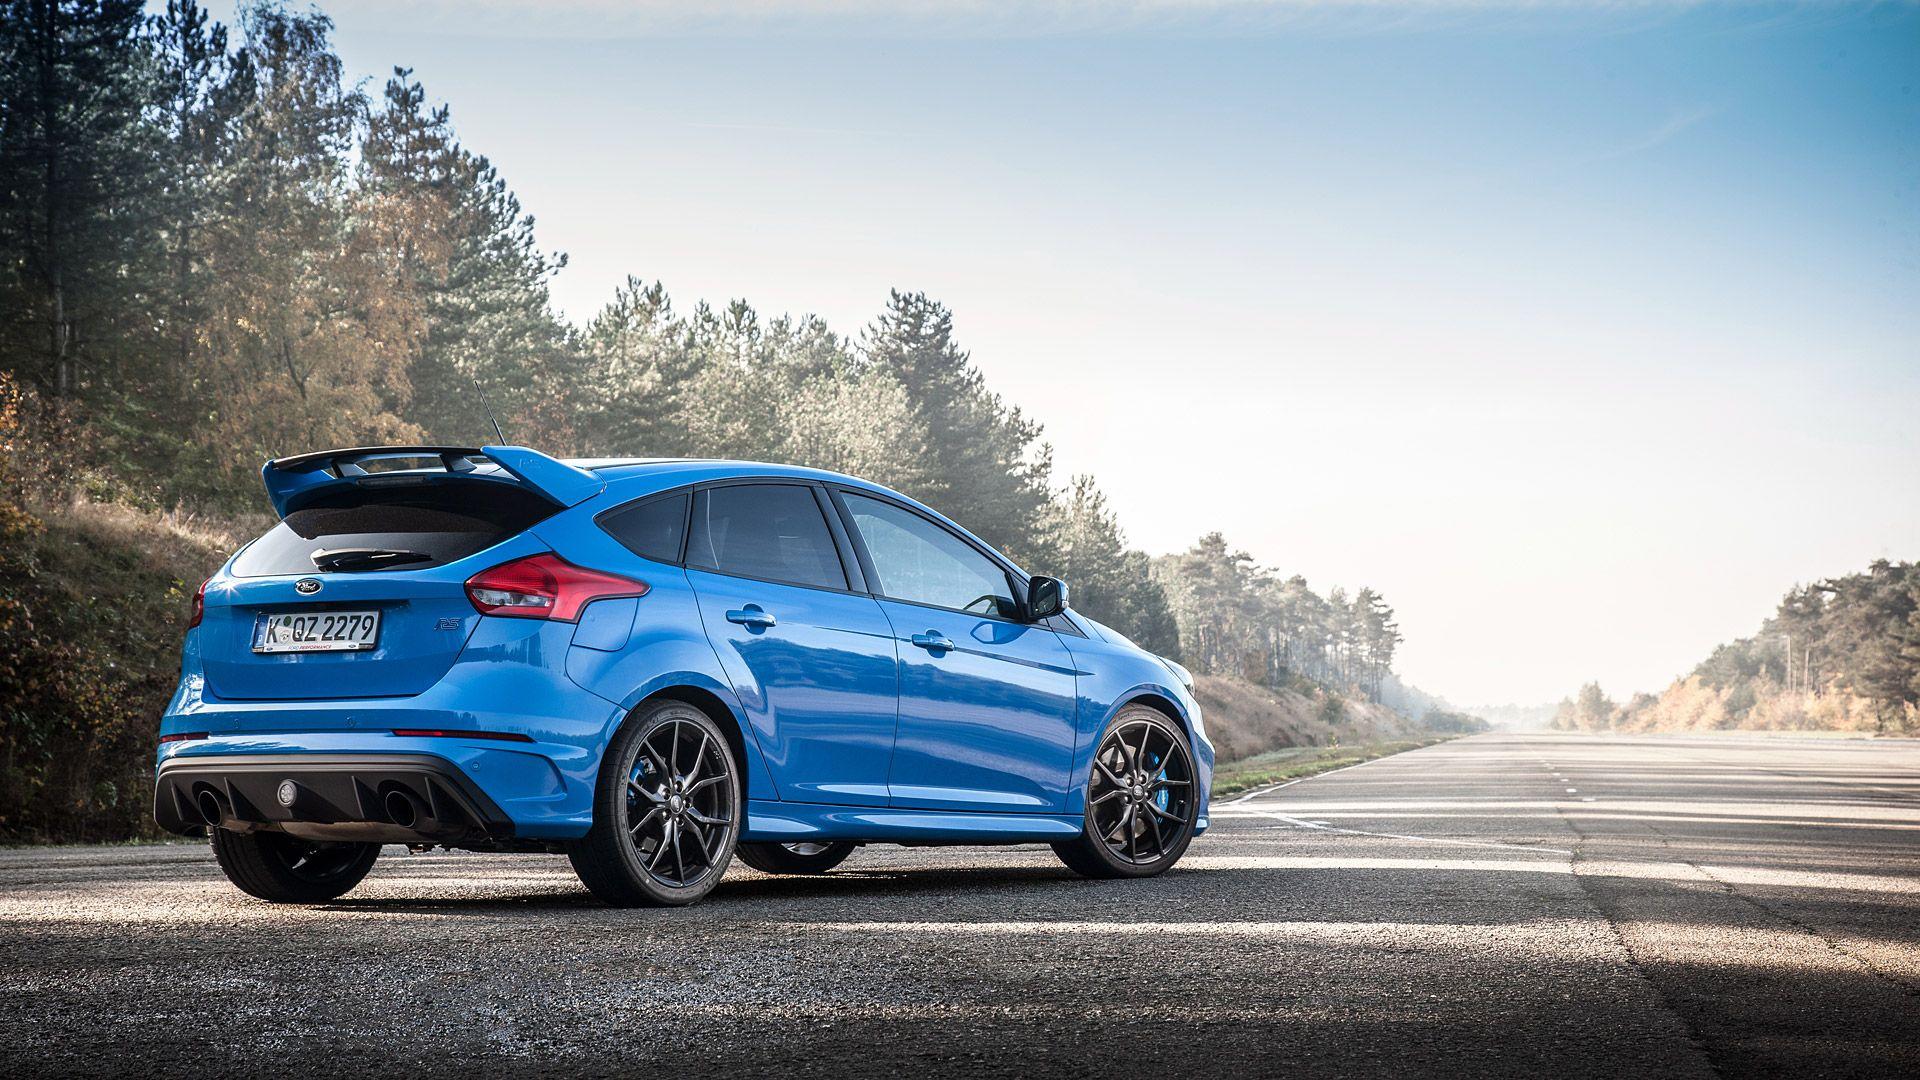 Ford Fiesta Rs Wallpapers Top Free Ford Fiesta Rs Backgrounds Wallpaperaccess